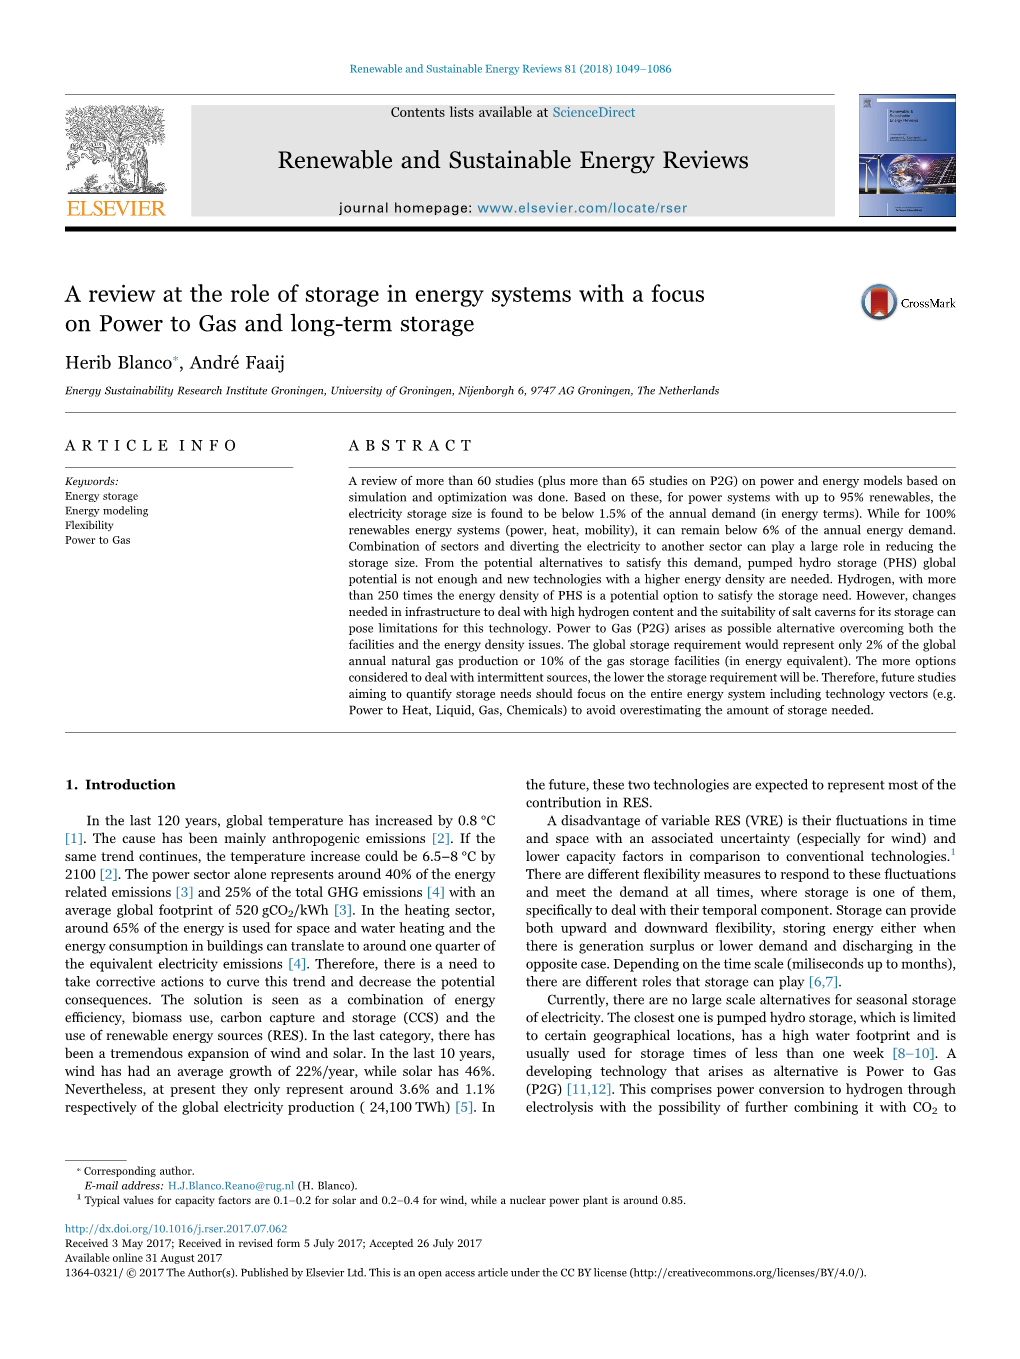 A Review at the Role of Storage in Energy Systems with a Focus on Power to Gas and Long-Term Storage